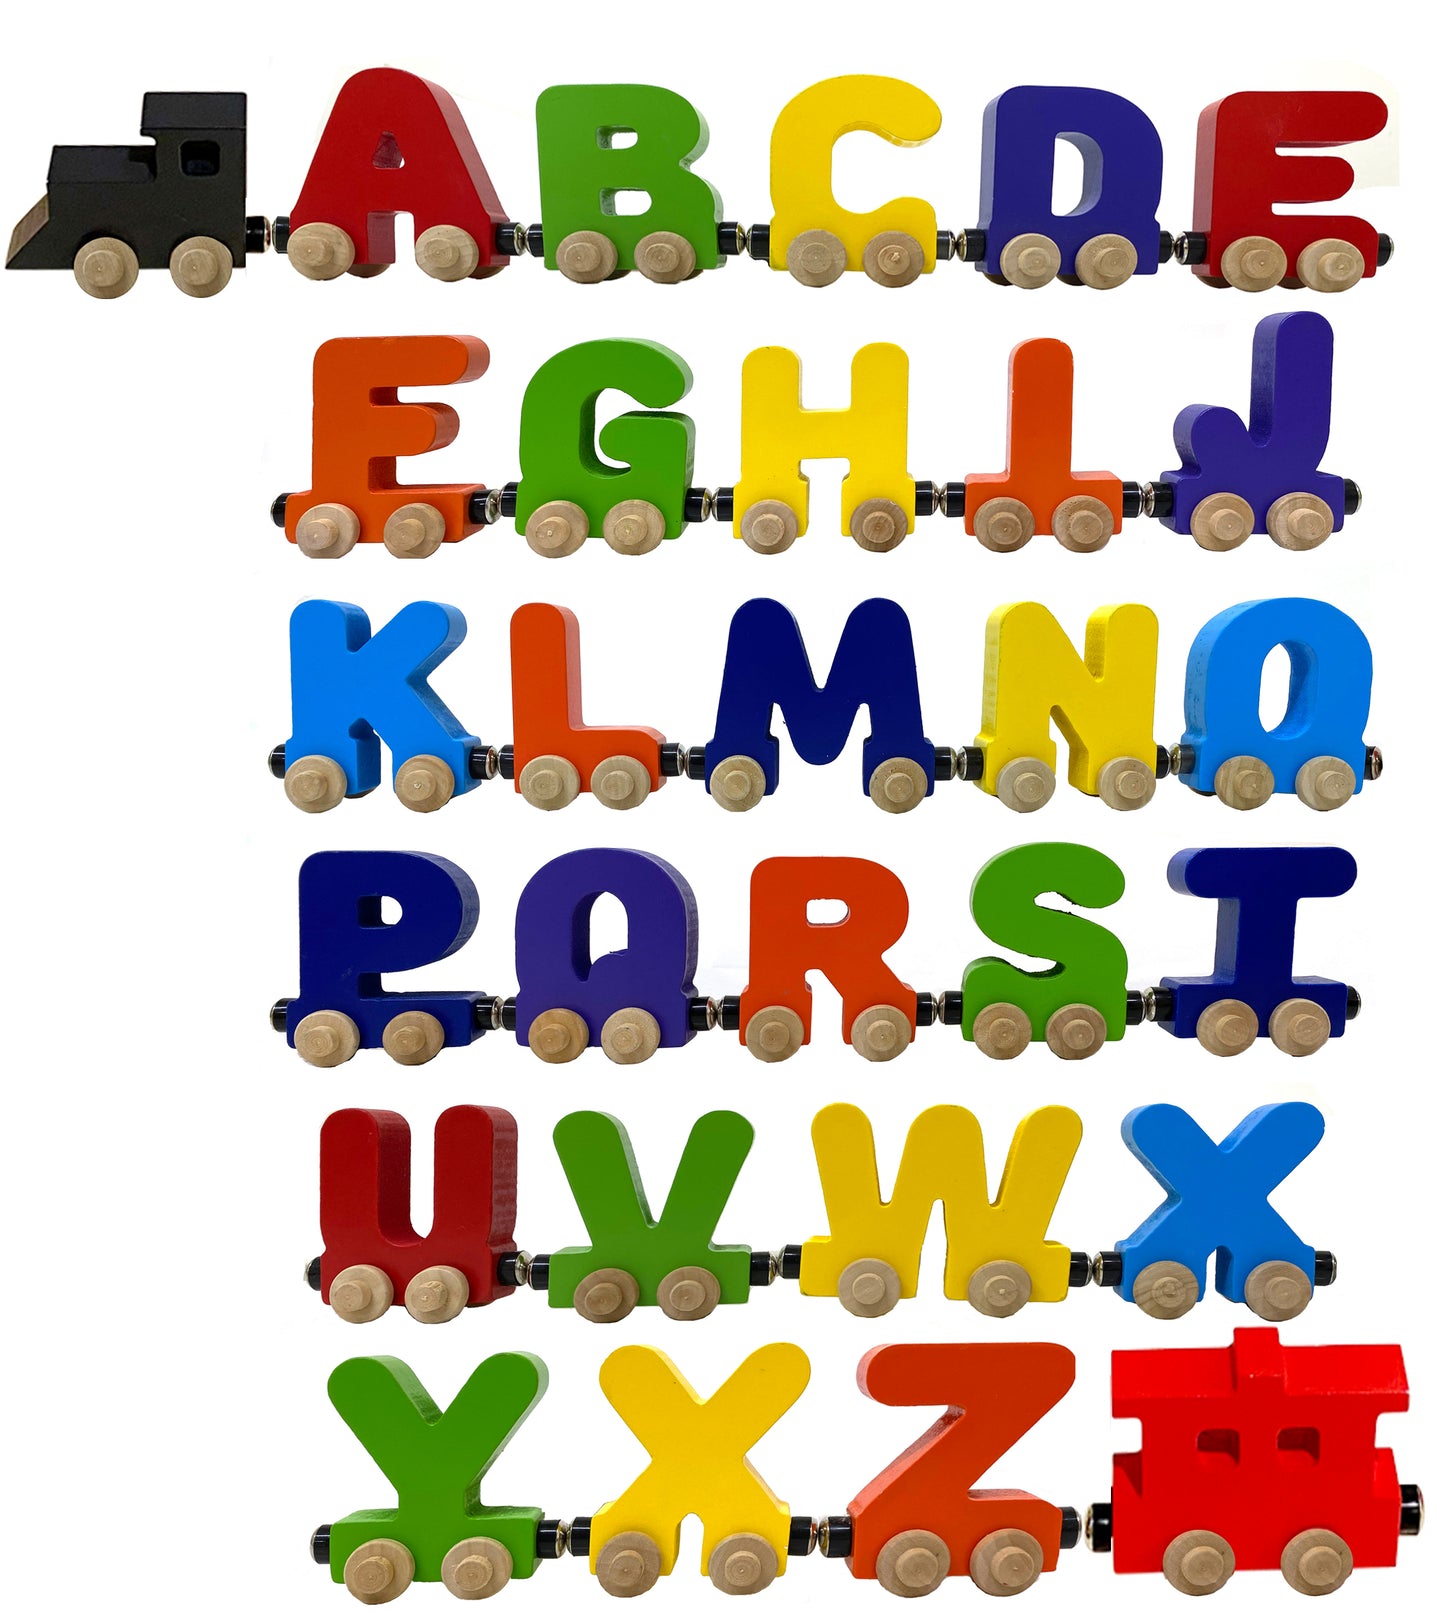 6 Letter Train Wooden Perosnalized Name Letters Includes Train & Wagon Letters Puzzle Includes Train & Wagon Free